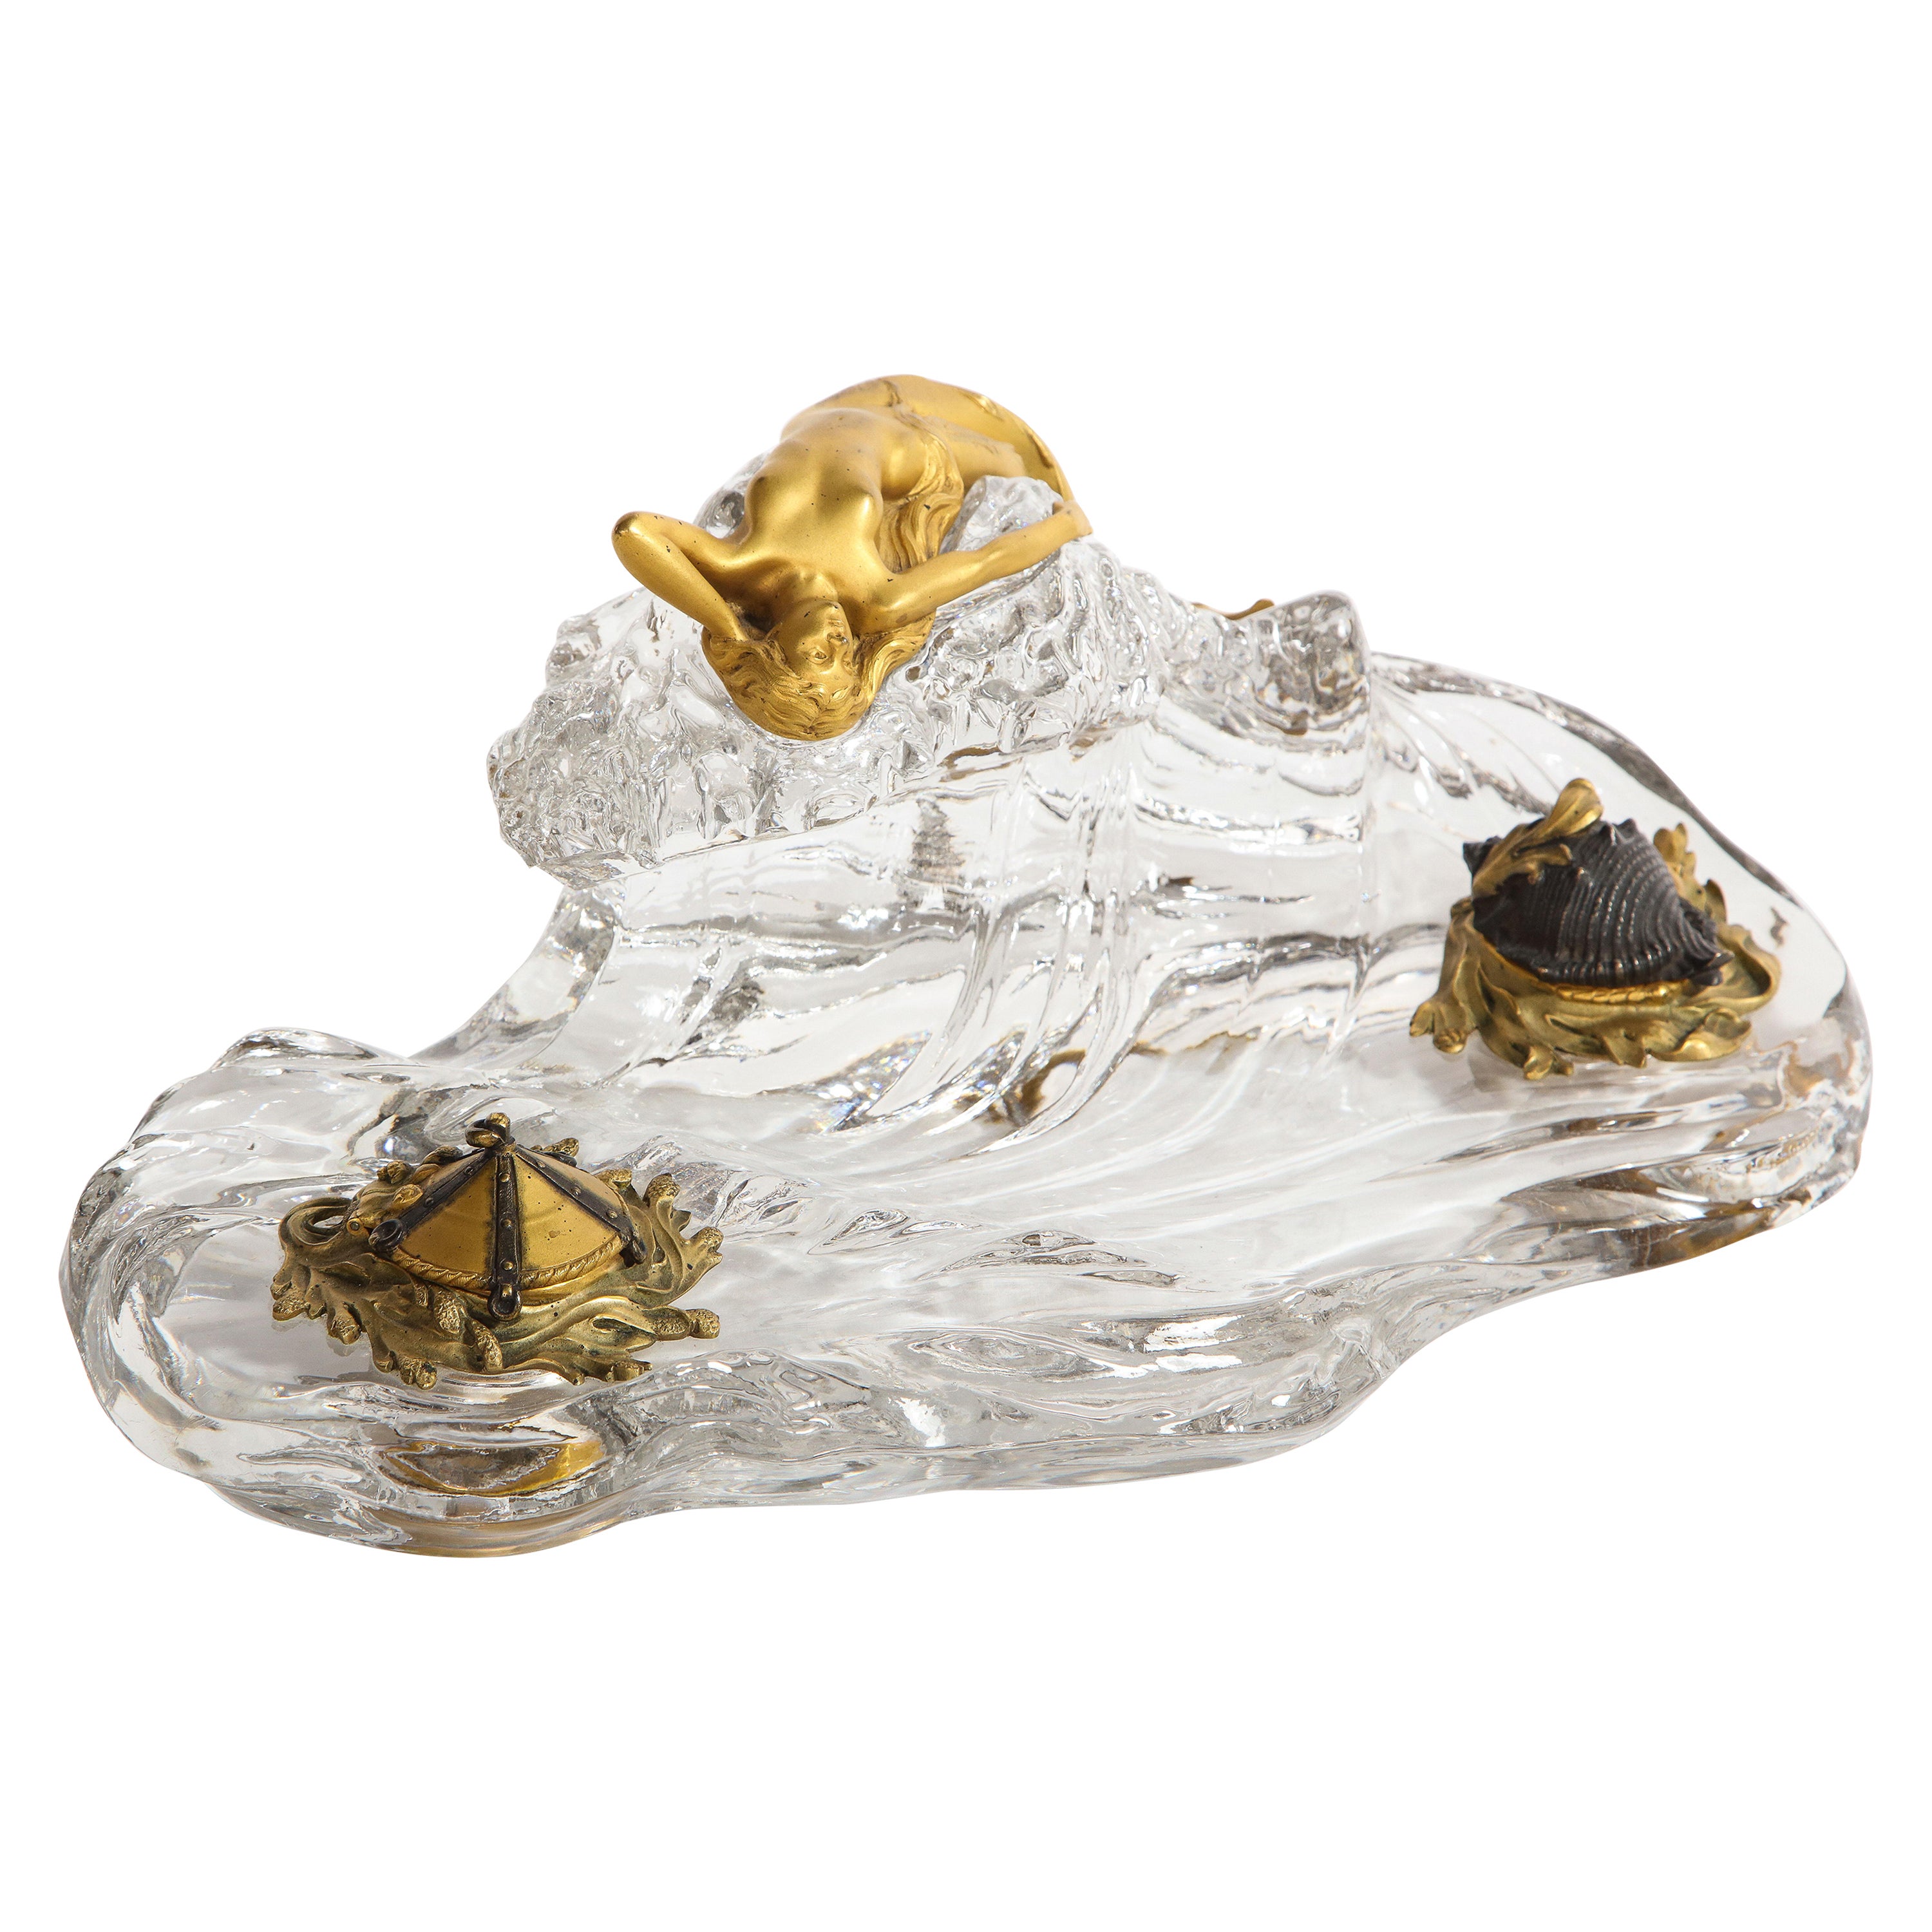 Signed Baccarat Crystal Nautical Inkwell with a Dore Bronze Maiden